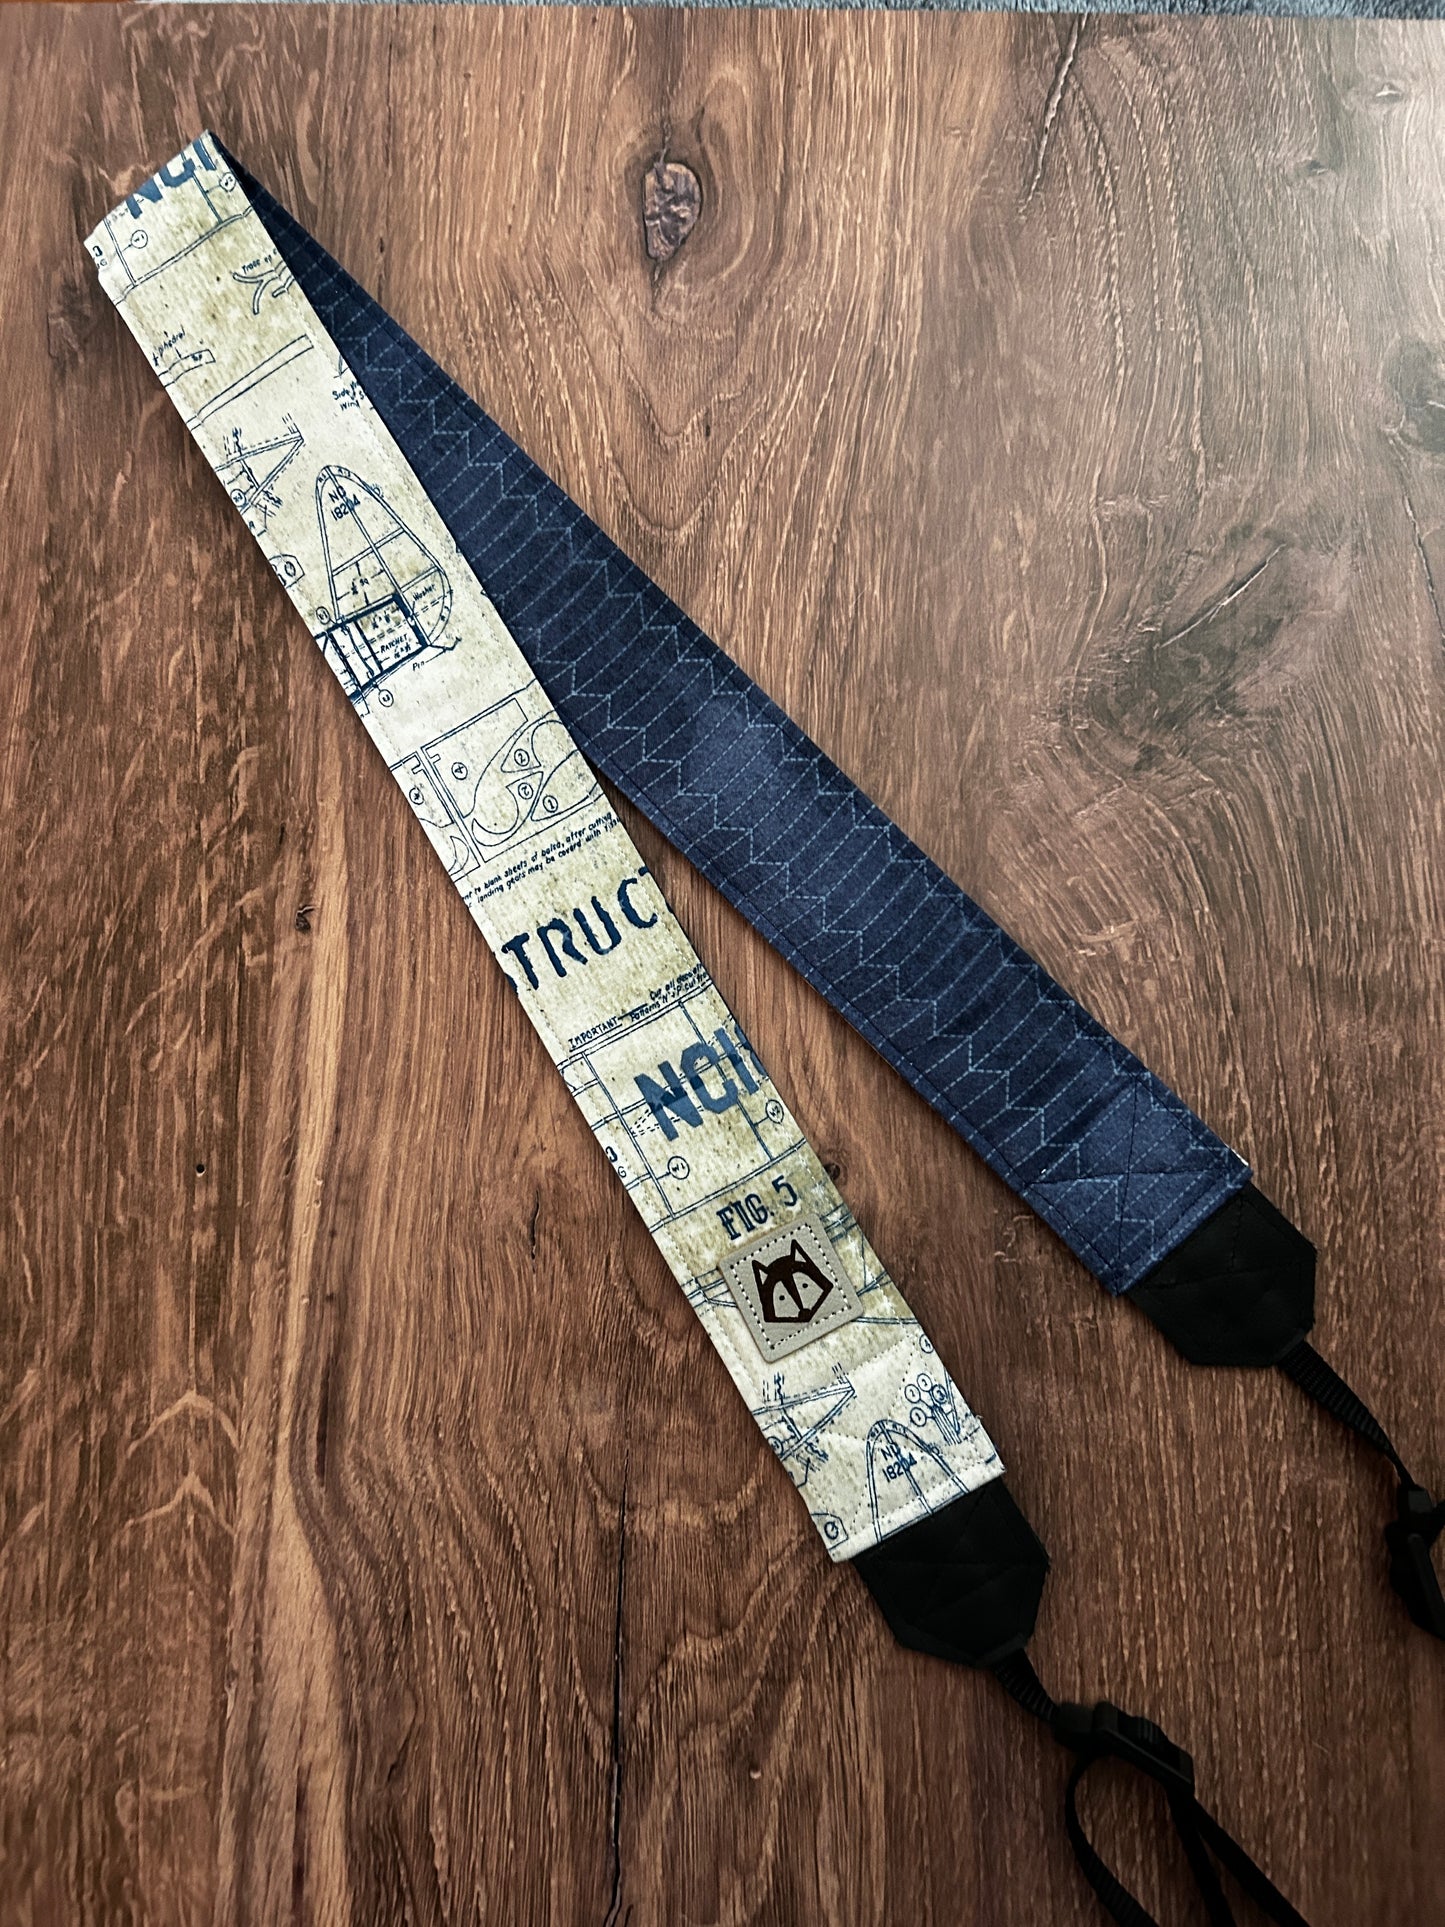 Airplane Adjustable Handmade Fabric Camera Strap - DSLR Strap - Photography Accessories - Gift